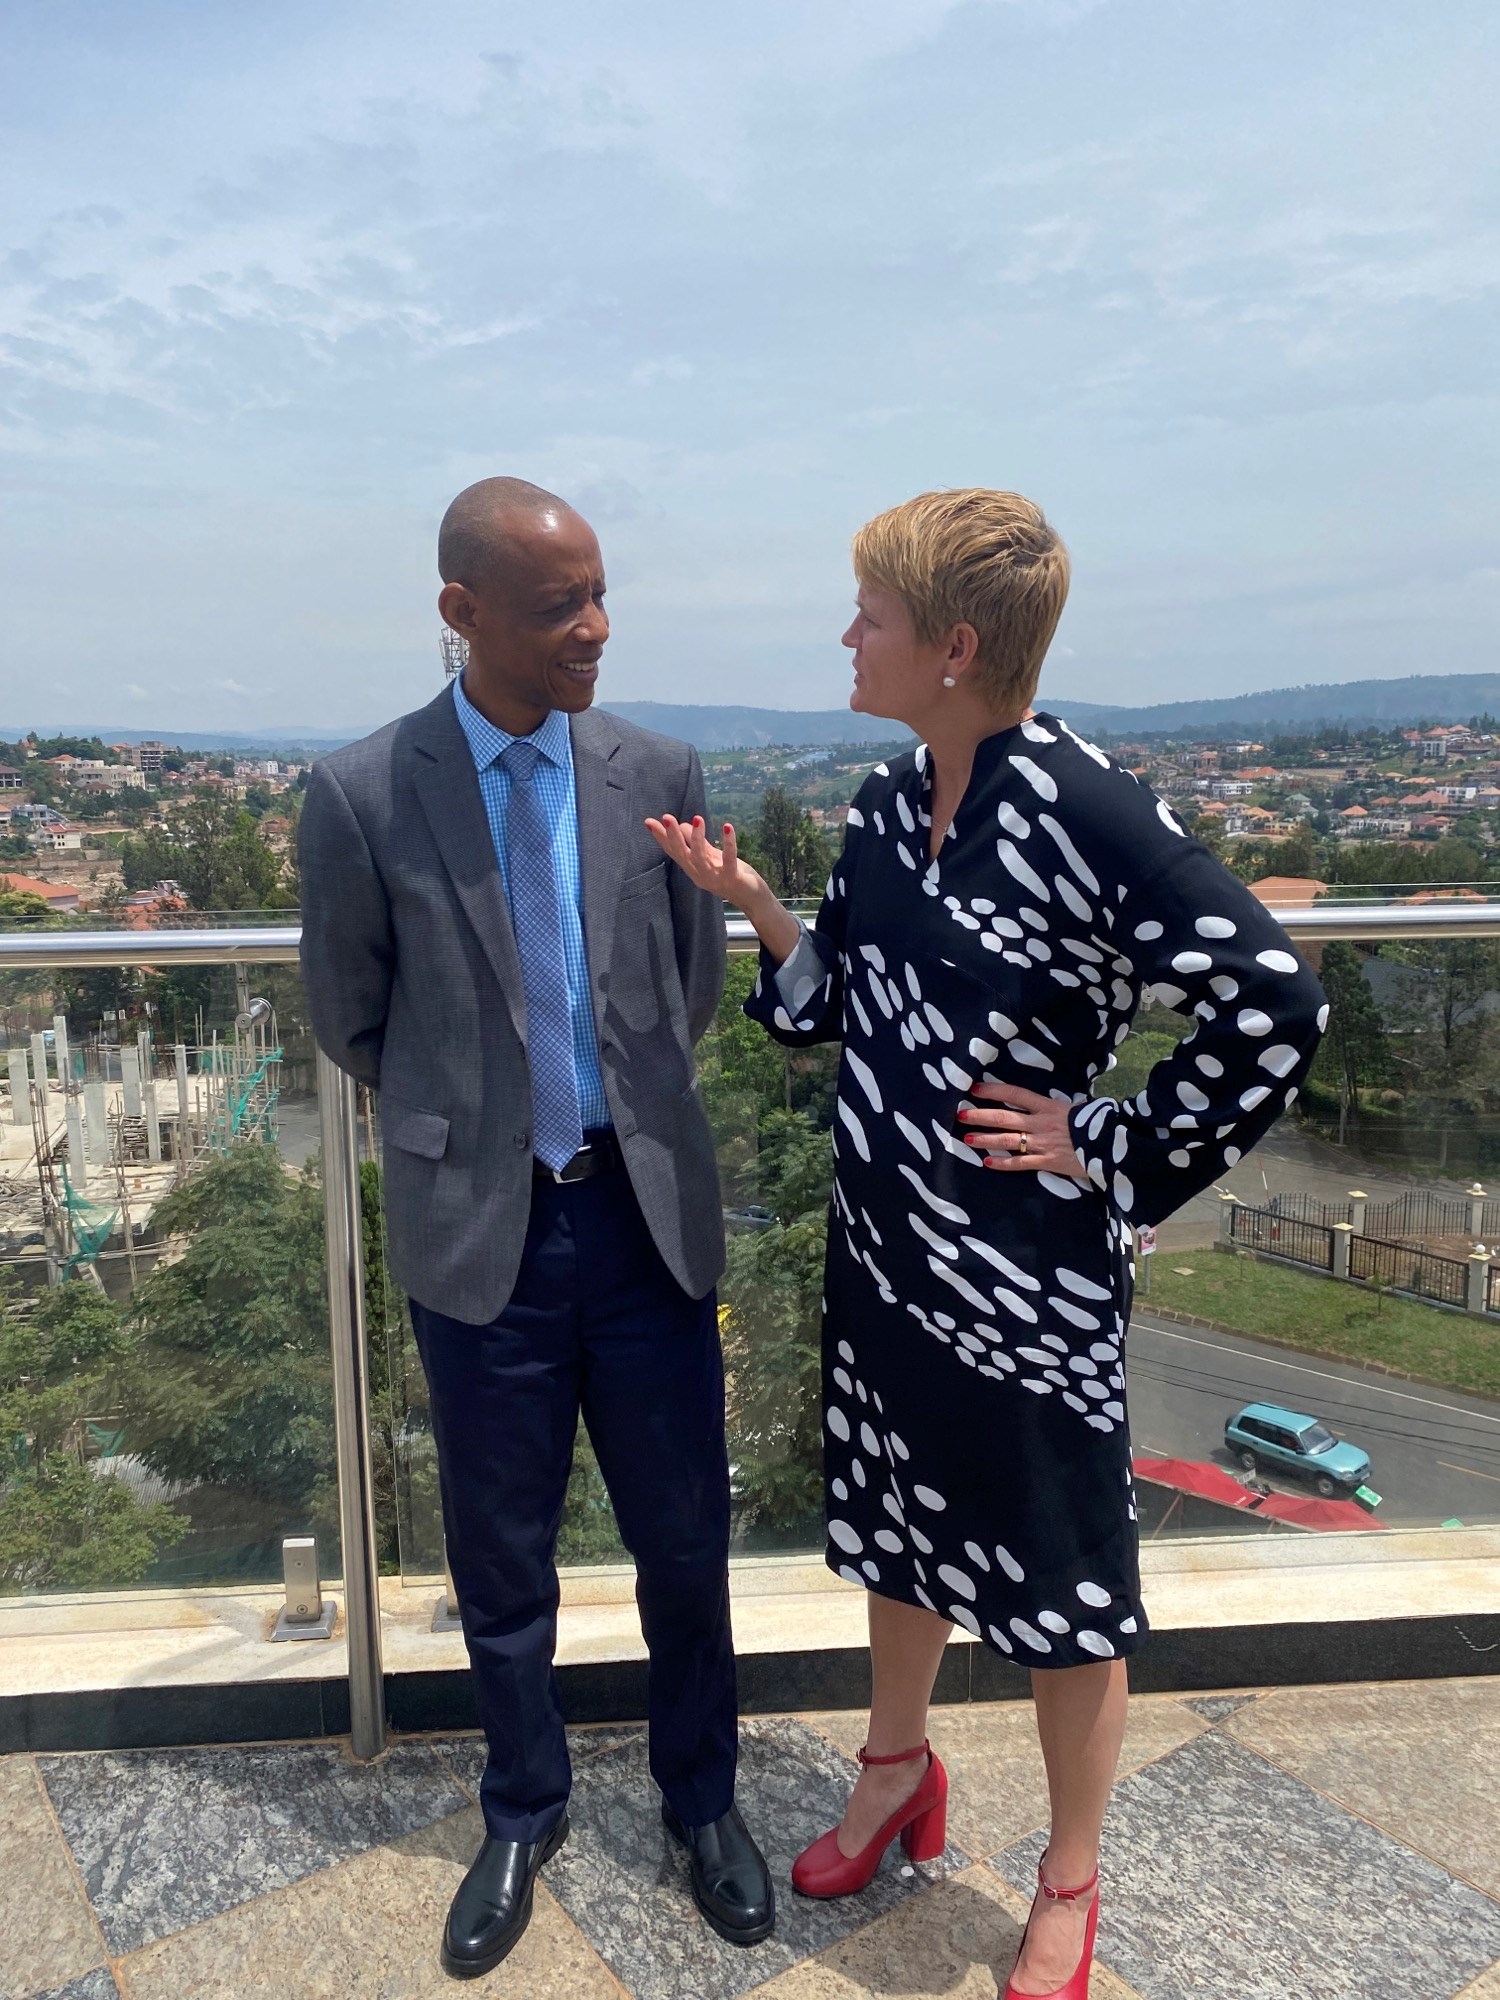 Discussion between General director of Food and Drug Administration and Swedish Ambassador in Rwanda with Kigali in the background